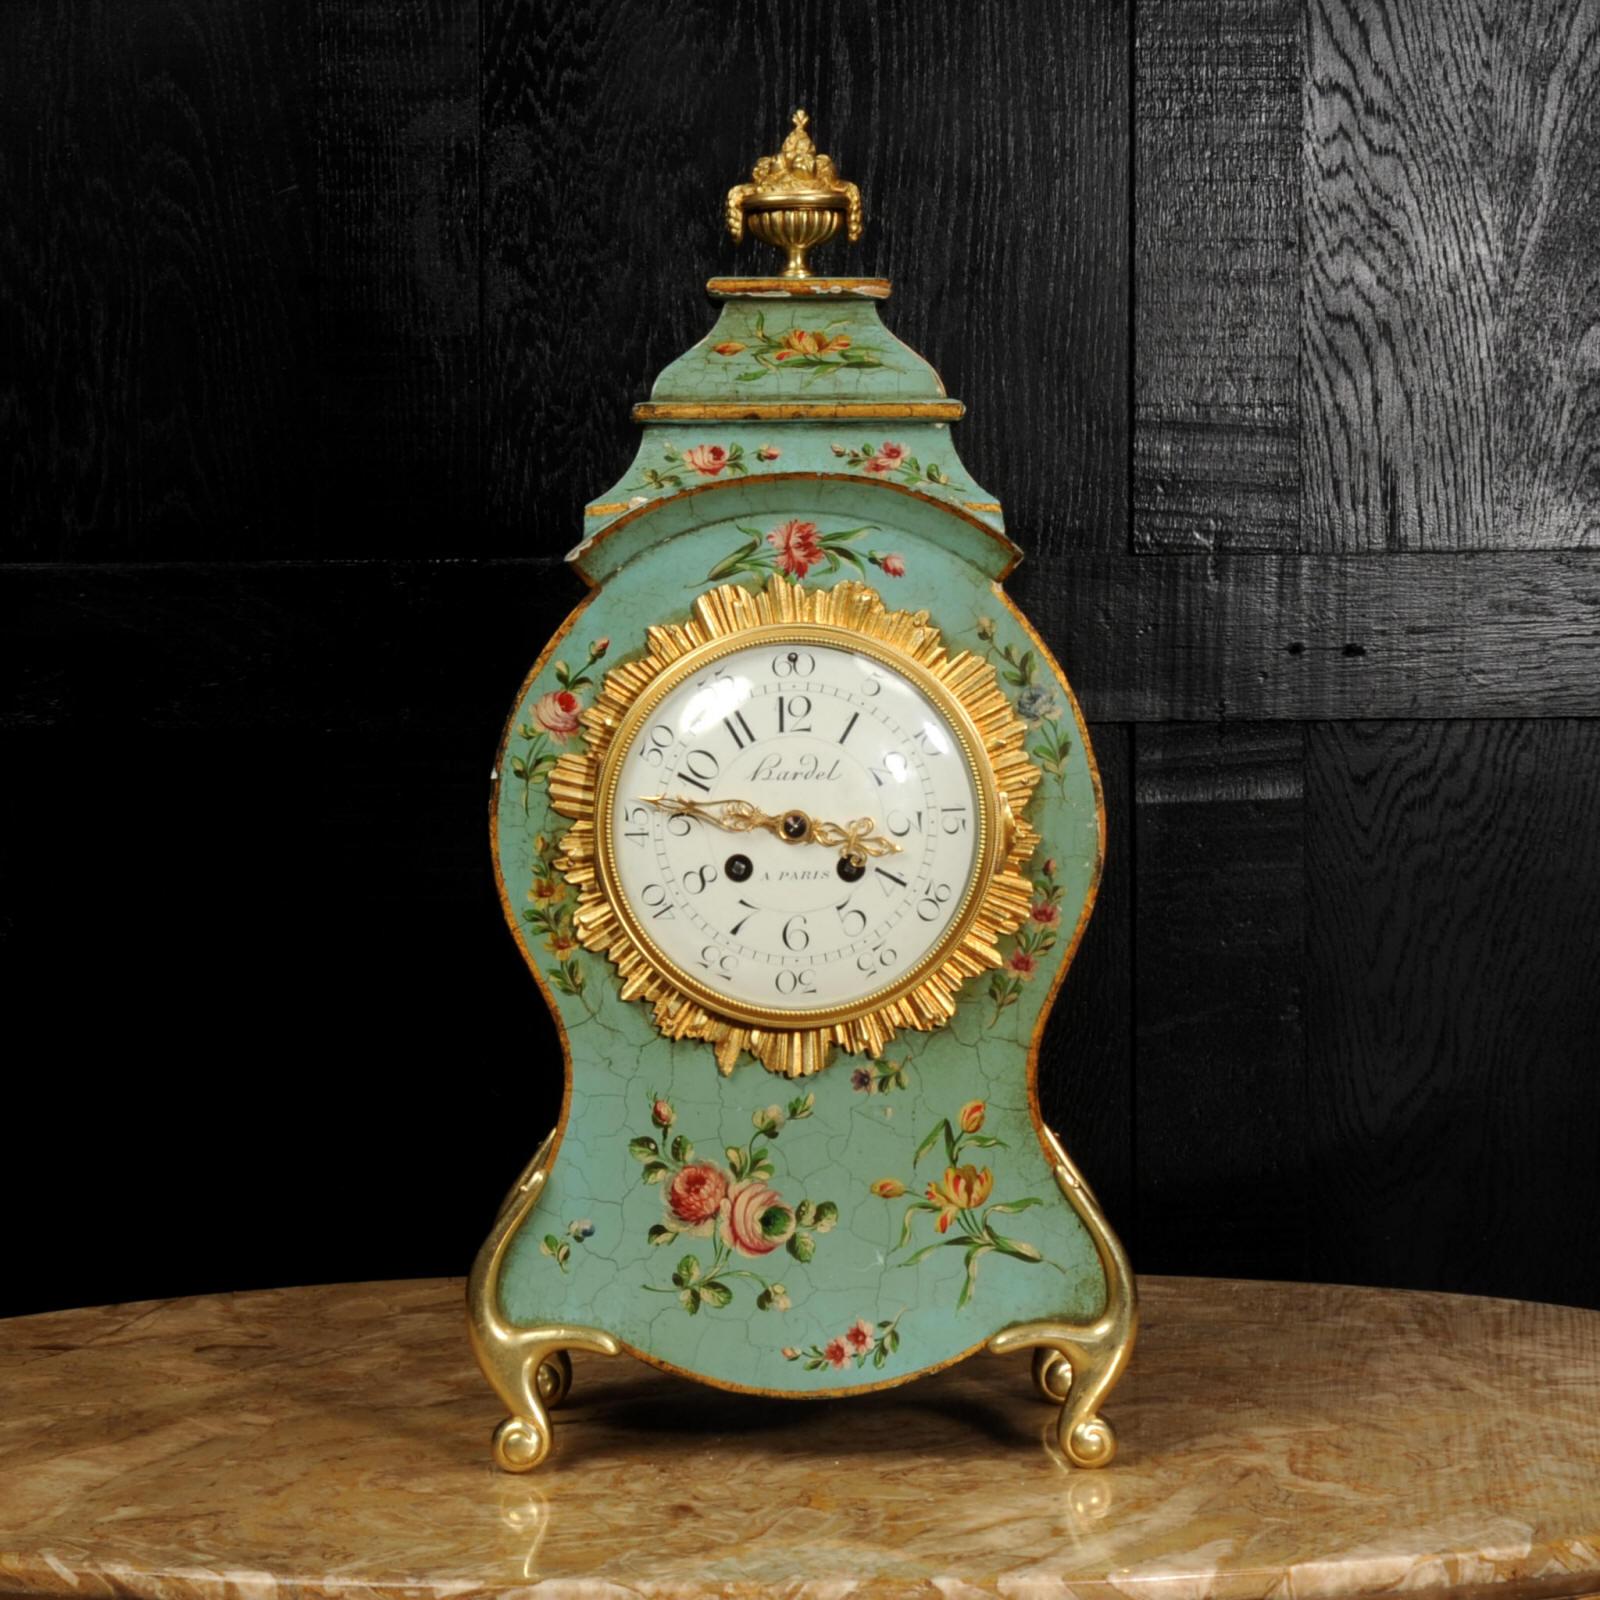 A large and beautiful antique French Vernis Martin style lacquer clock by Planchon of Paris. Decorated in exquisite Eau de Nil ground with delicate floral swags, mounted with crisp ormolu (finely gilded bronze) mounts.

The large dial is porcelain